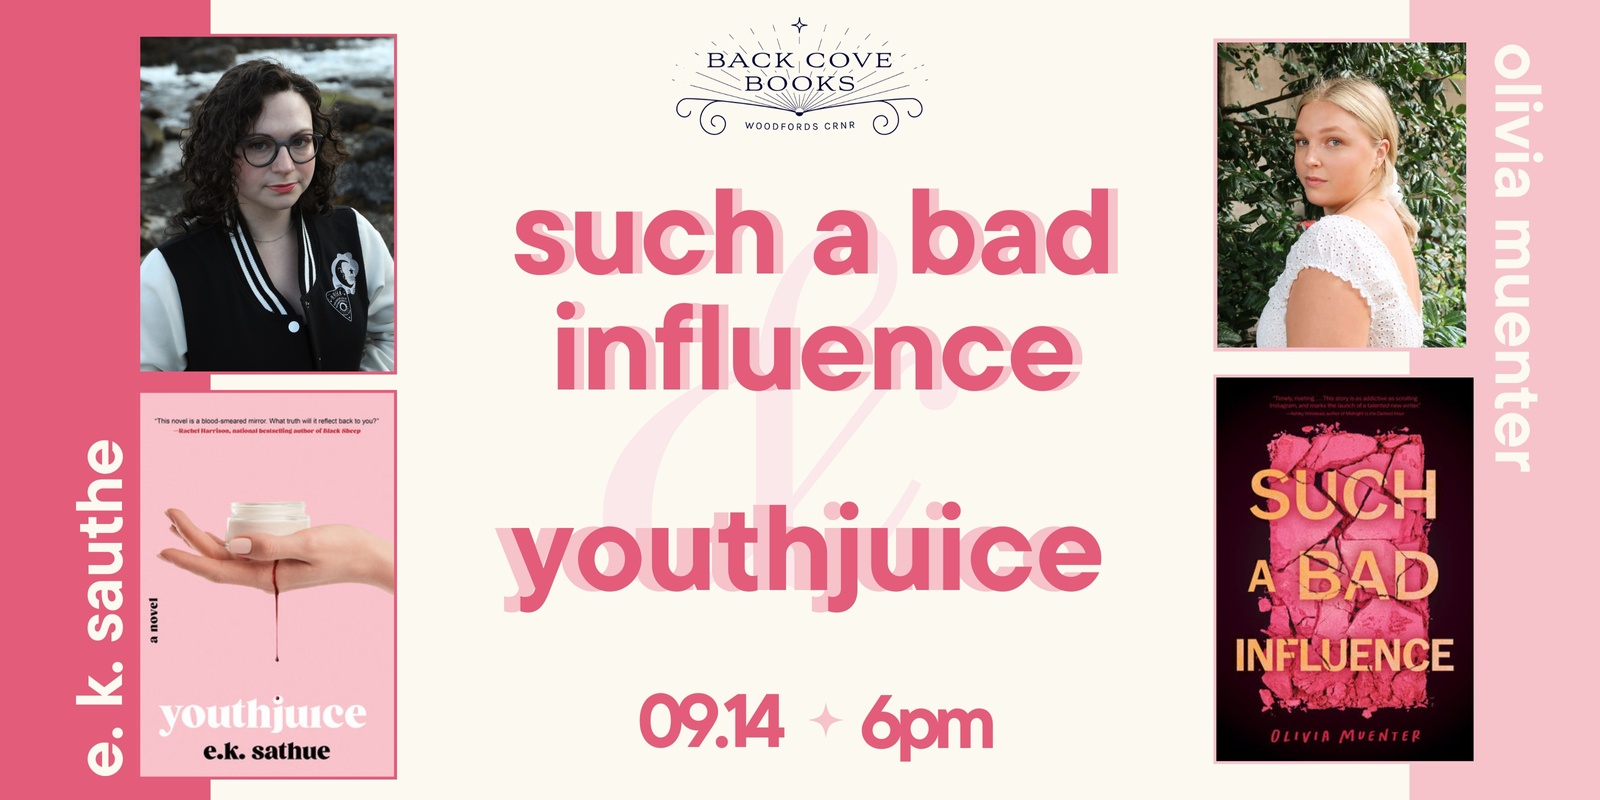 Banner image for Such a Bad Influence & Youthjuice with Olivia Muenter and E.K. Sathue